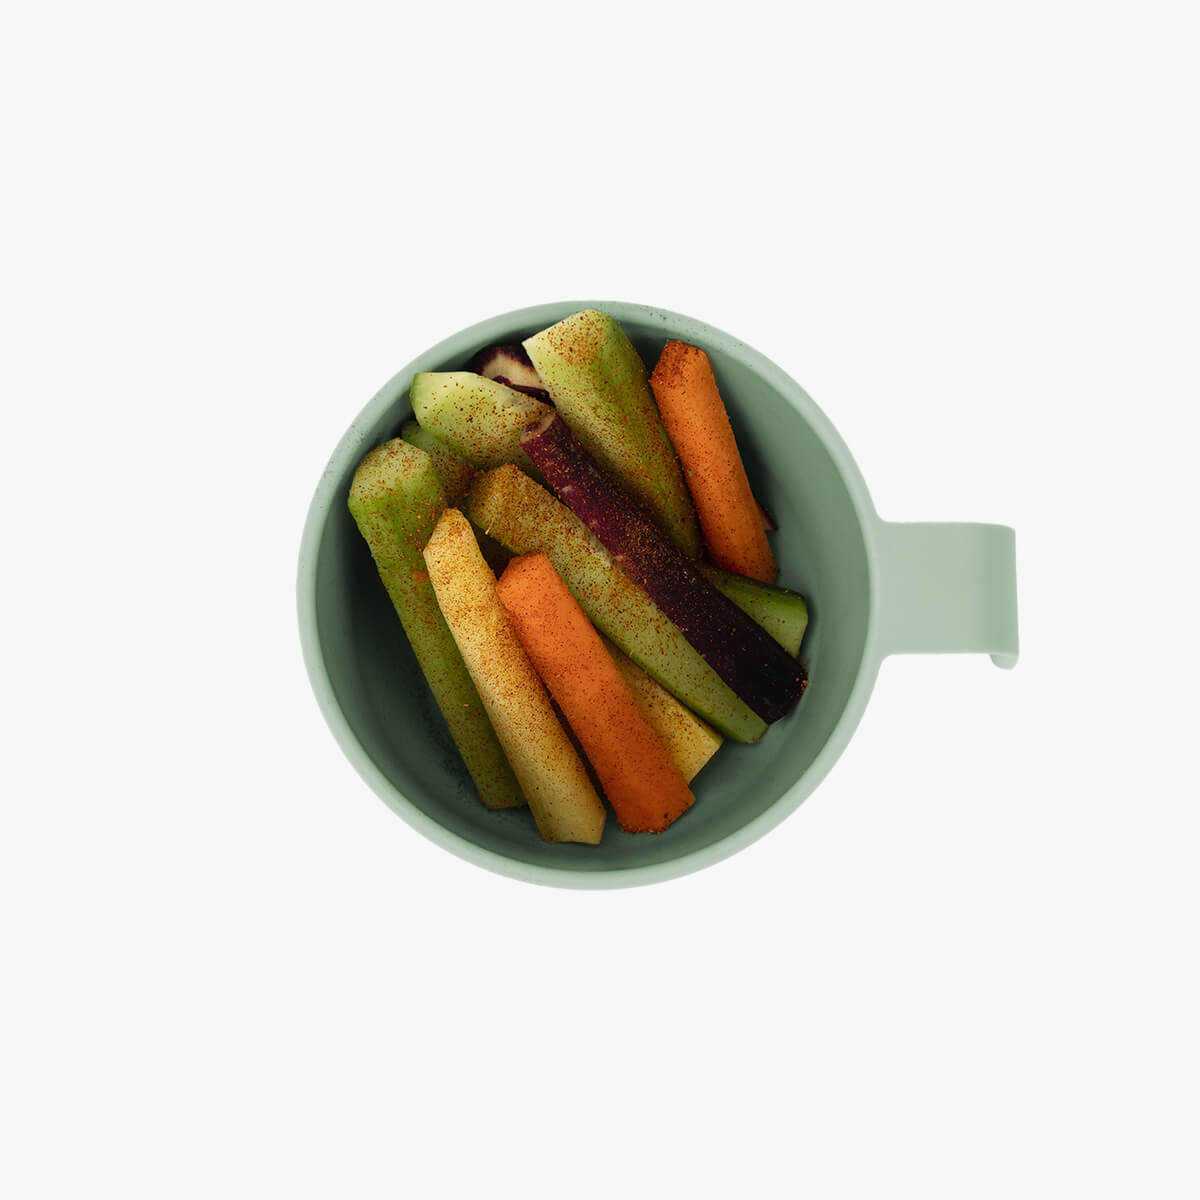 Snack Bowl in Sage / ezpz Basics Line / Bowl with Handle and Lid for Kids